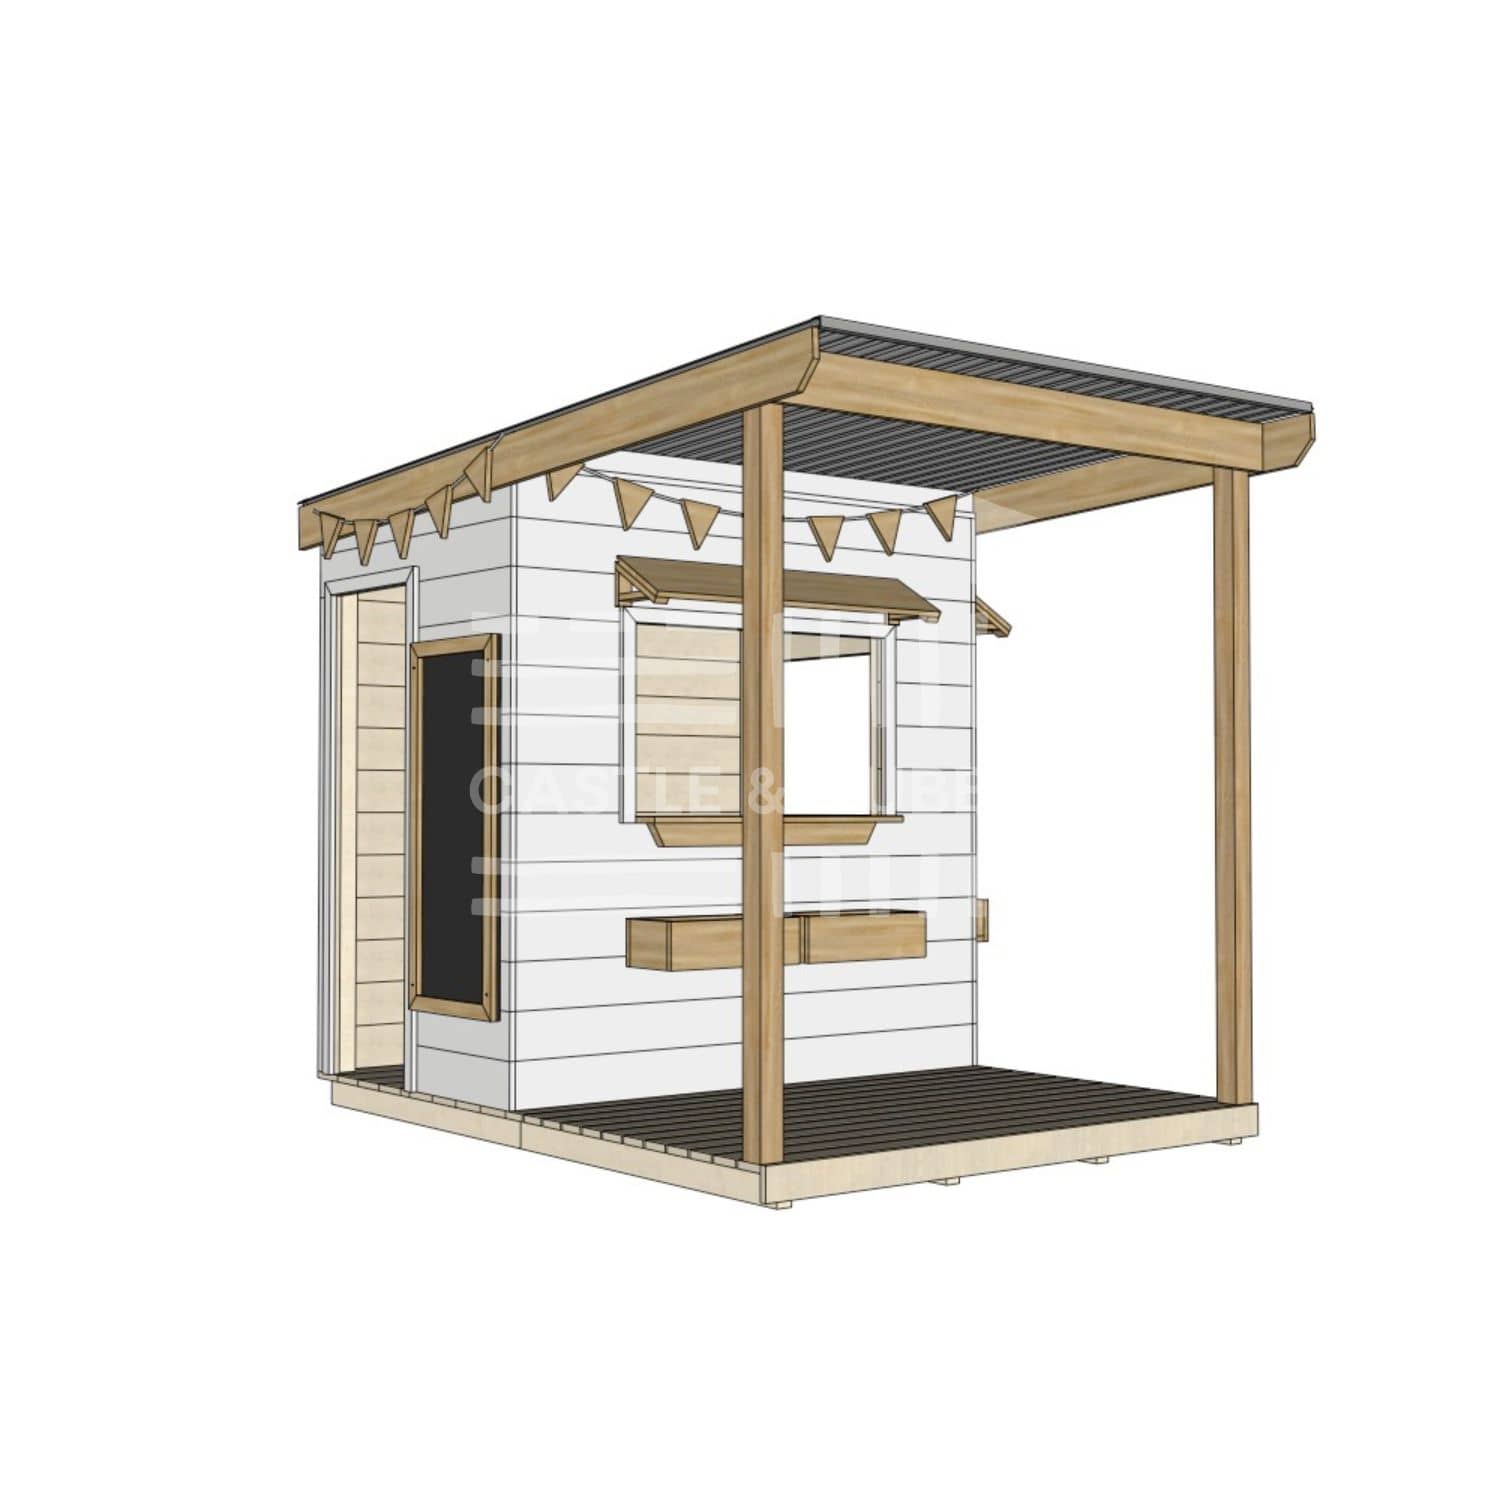 A commercial grade extended height painted wooden little rectangle cubby house with front verandah and accessories